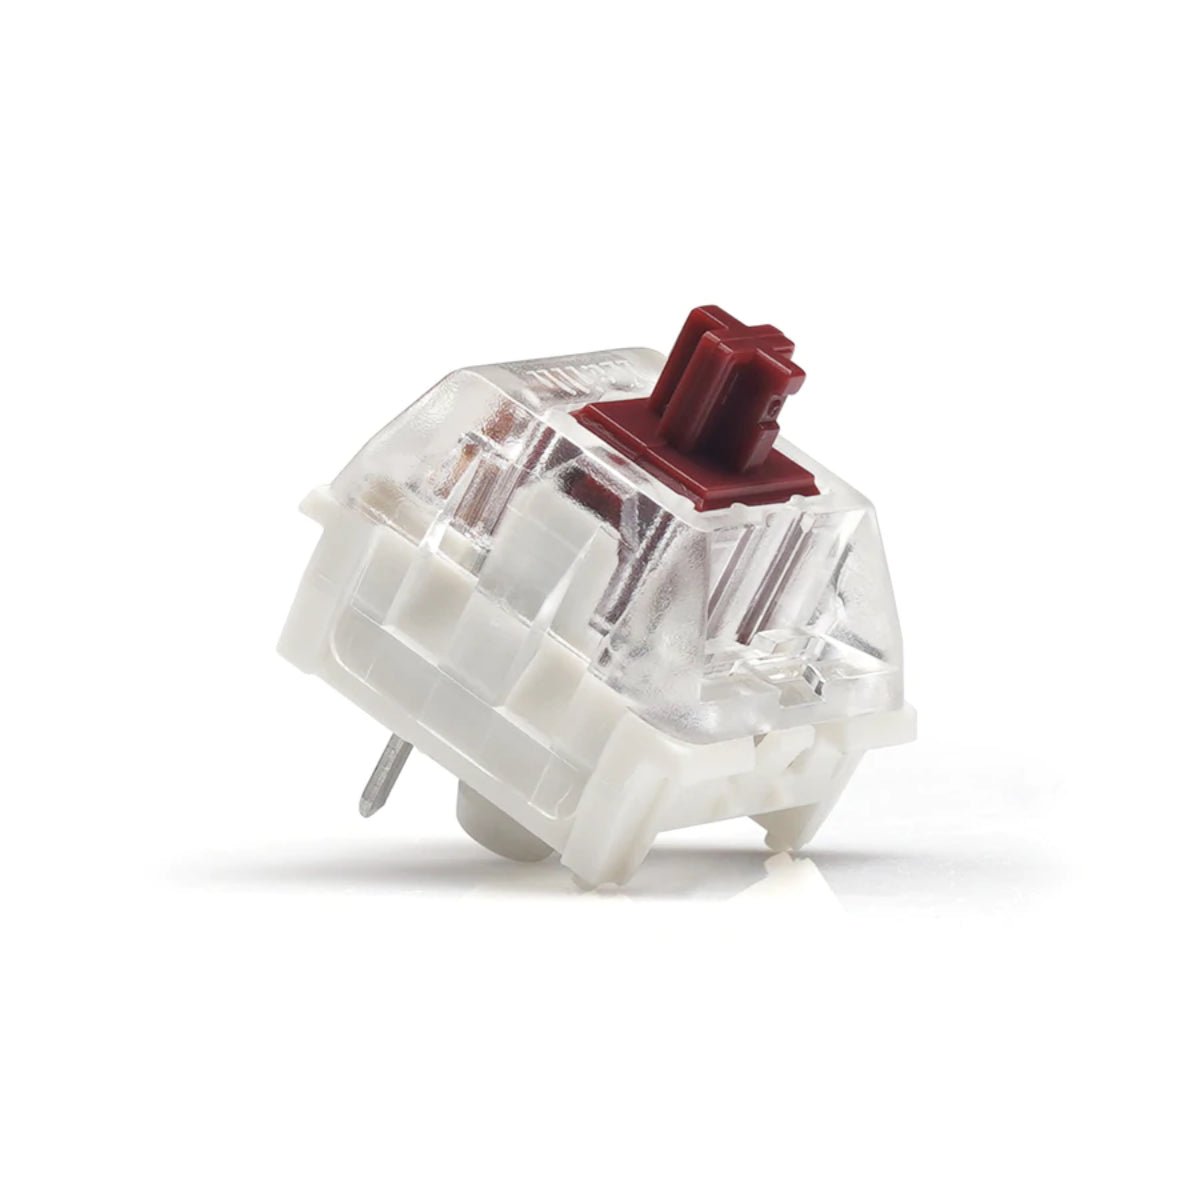 KBD Fans Kailh Speed Tactile Switches - Copper - Store 974 | ستور ٩٧٤